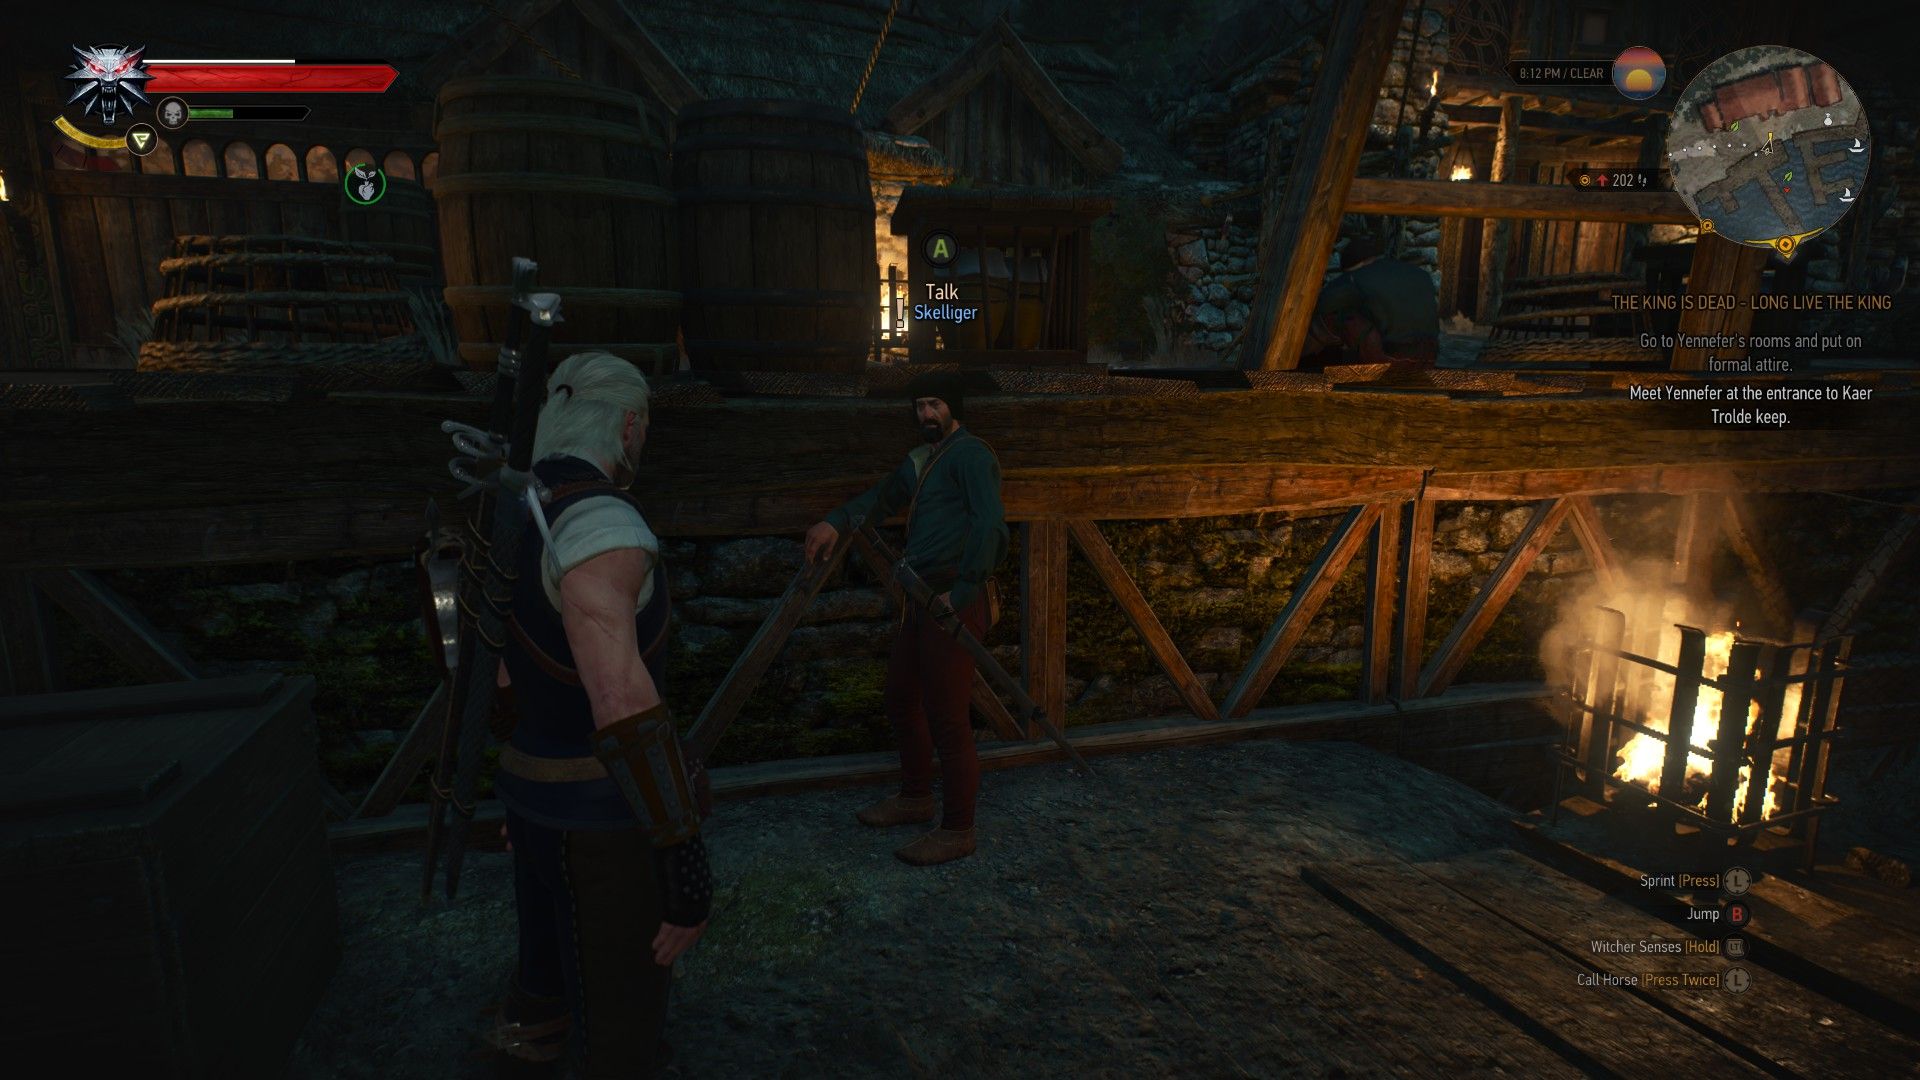 A screenshot of Geralt talking to Skelliger in The Witcher 3 Harbor.